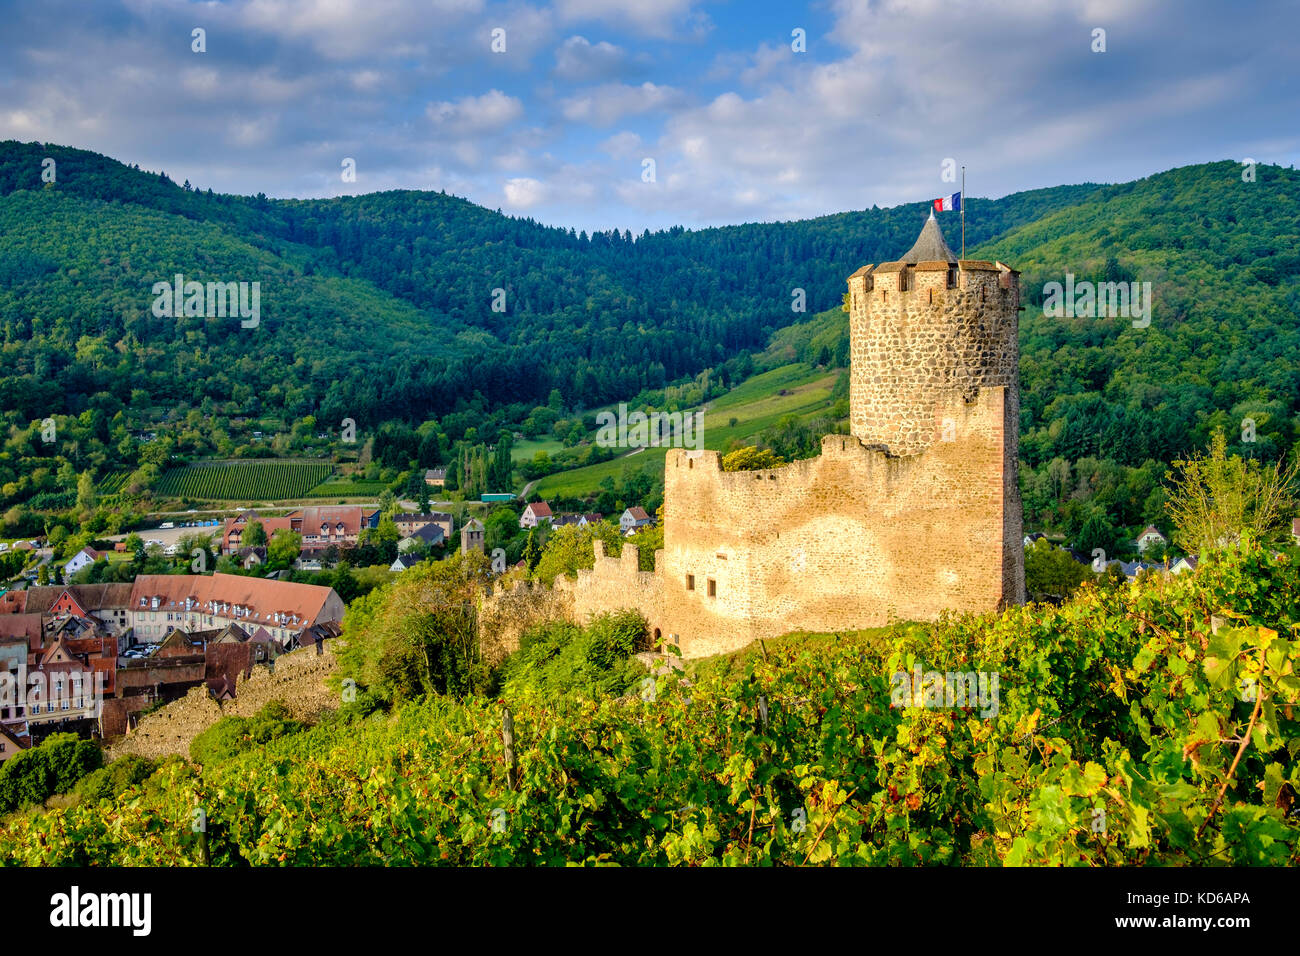 The Château de Kaysersberg is a ruined castle located in the vineyards surrounding the historical town Stock Photo